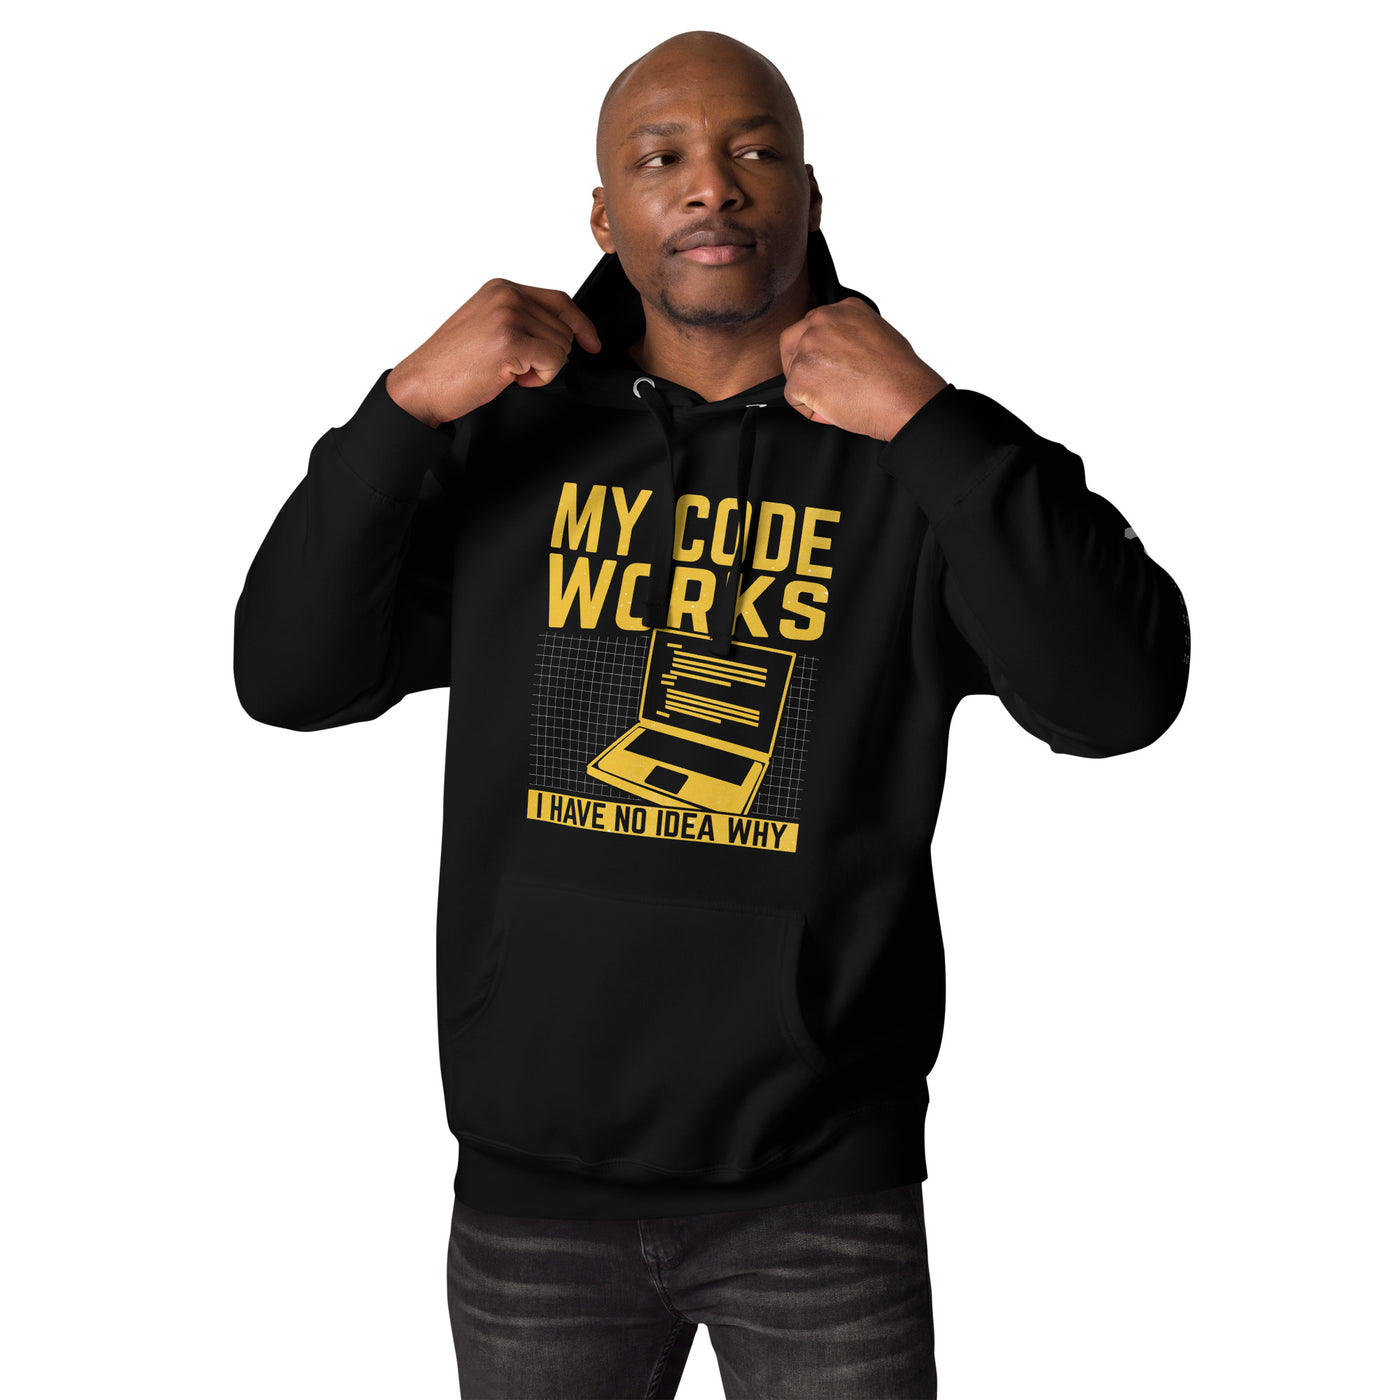 My Code works, I have no Idea why - Unisex Hoodie